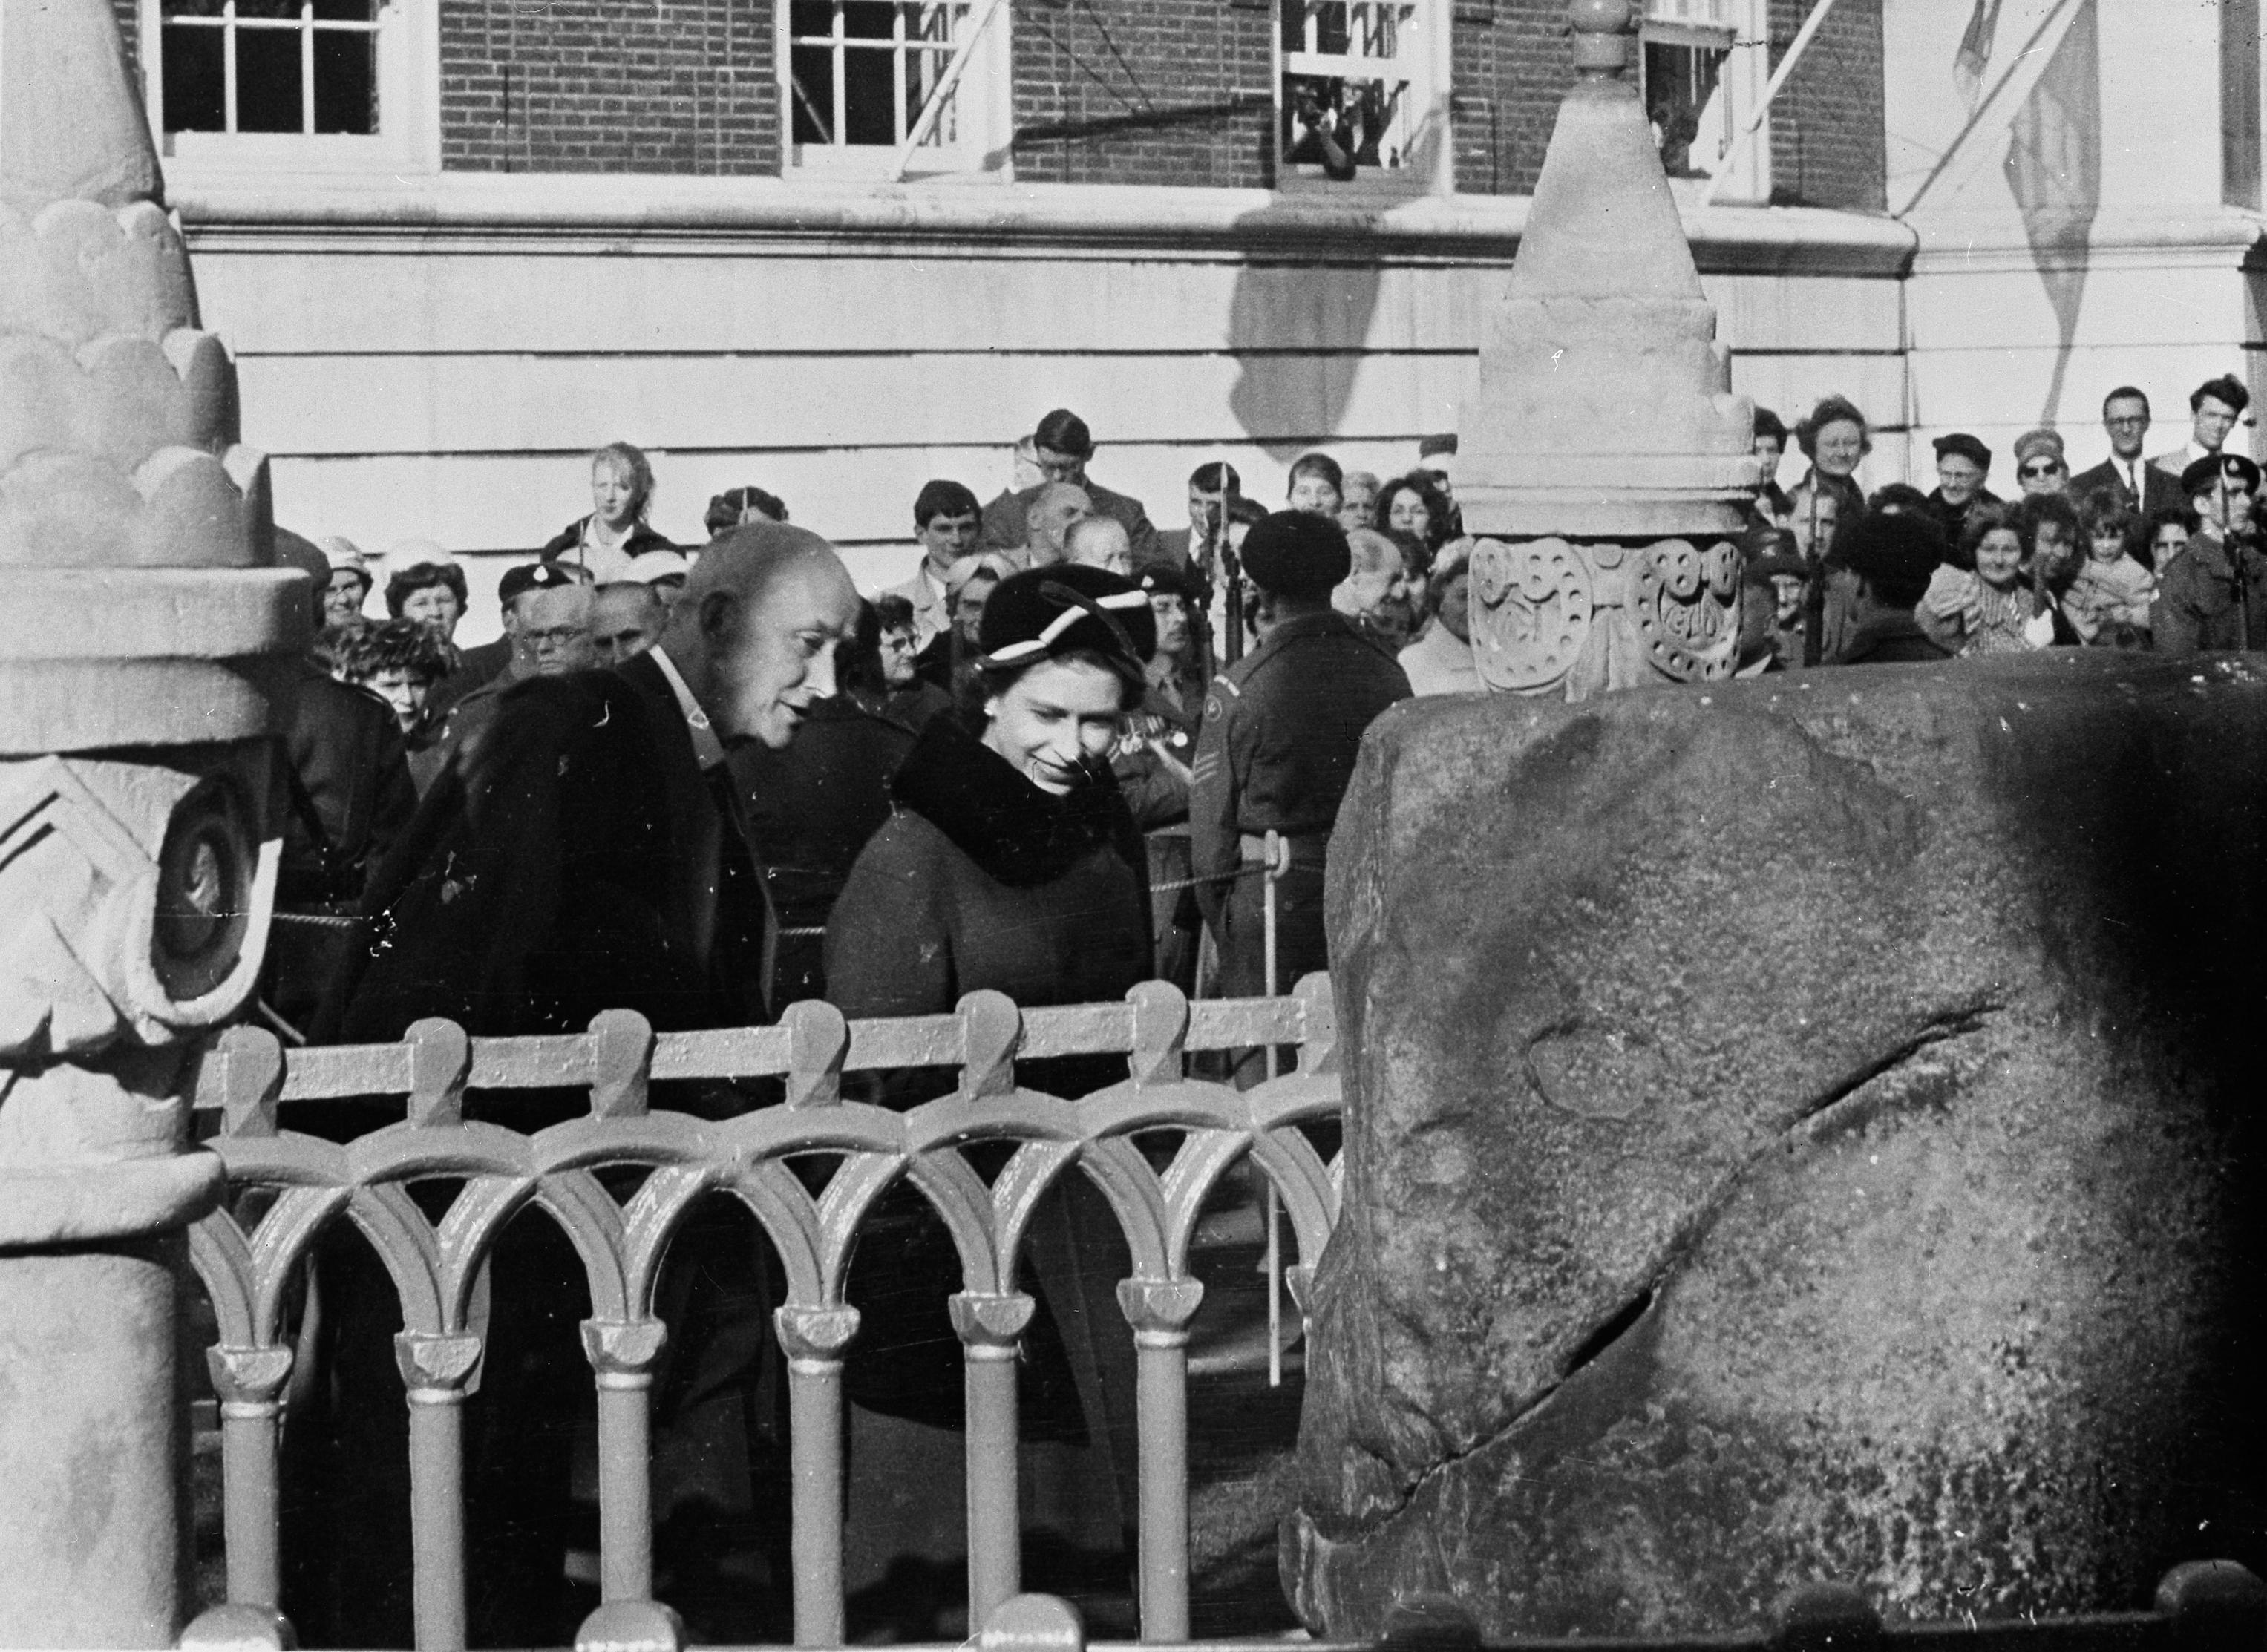 Queen Elizabeth II looking over the railings at the Coronation Stone